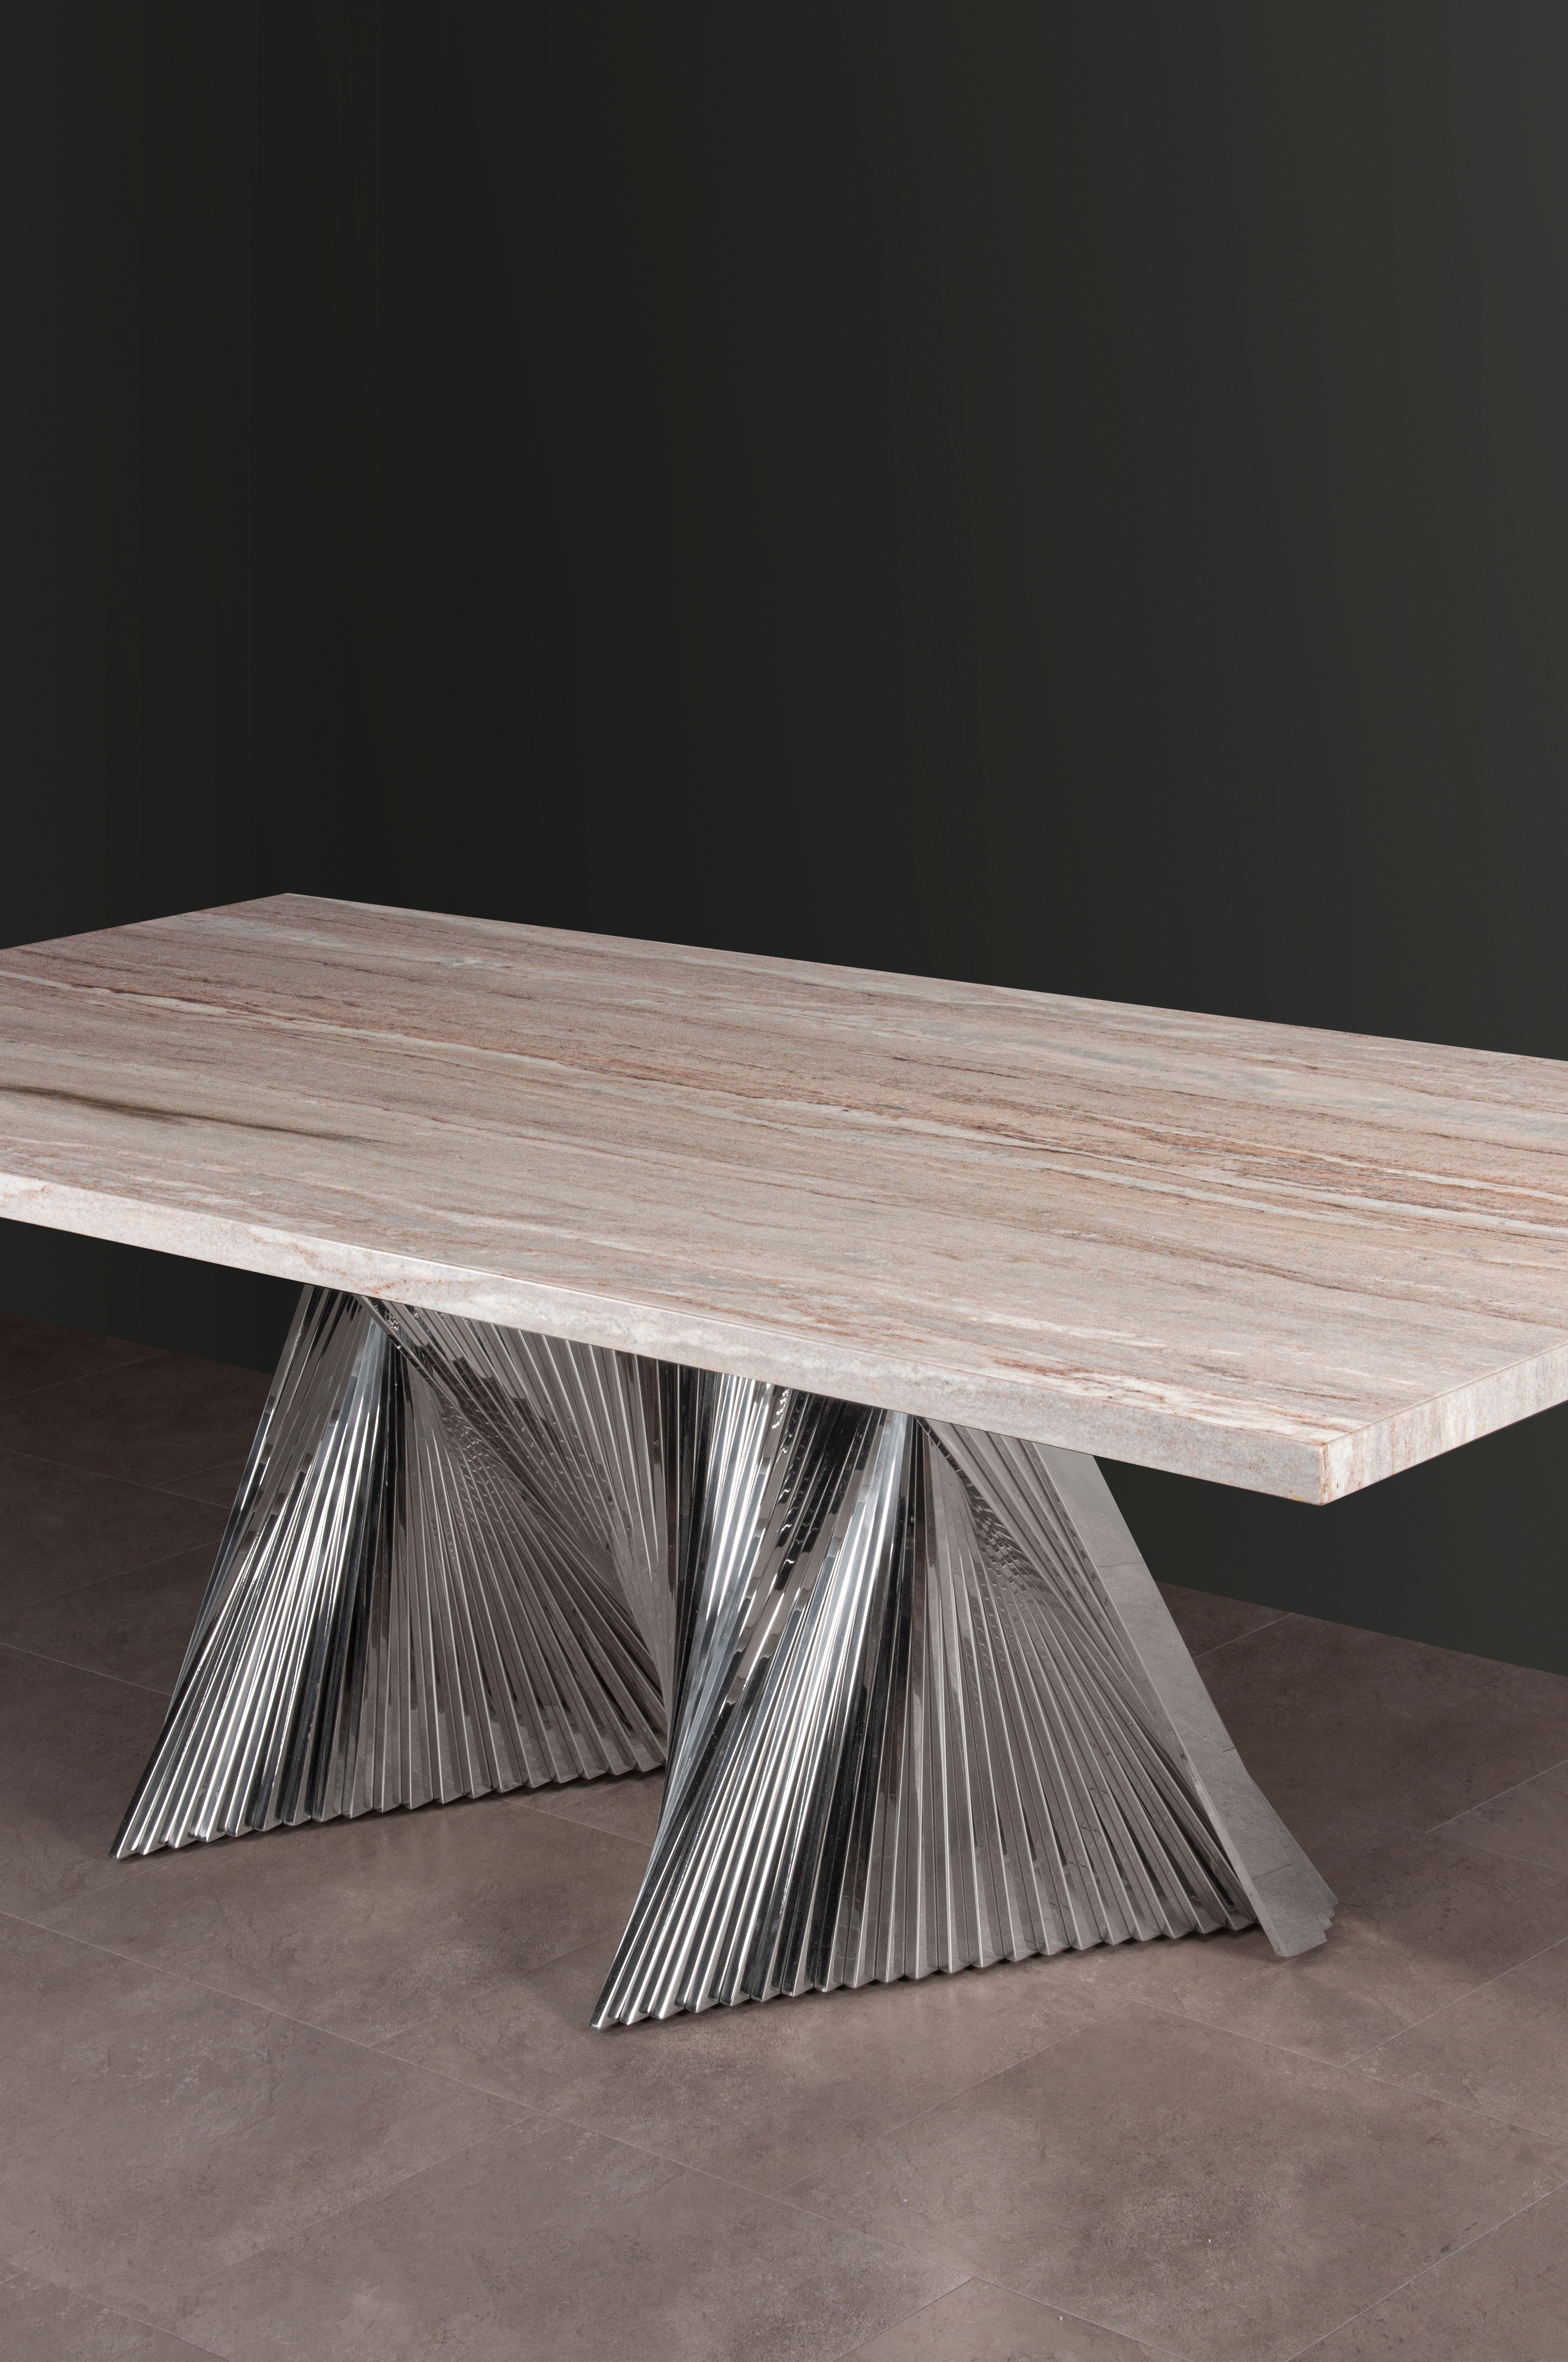 Moore 2 | Art Series | Decasa Marble Marble Dining Table